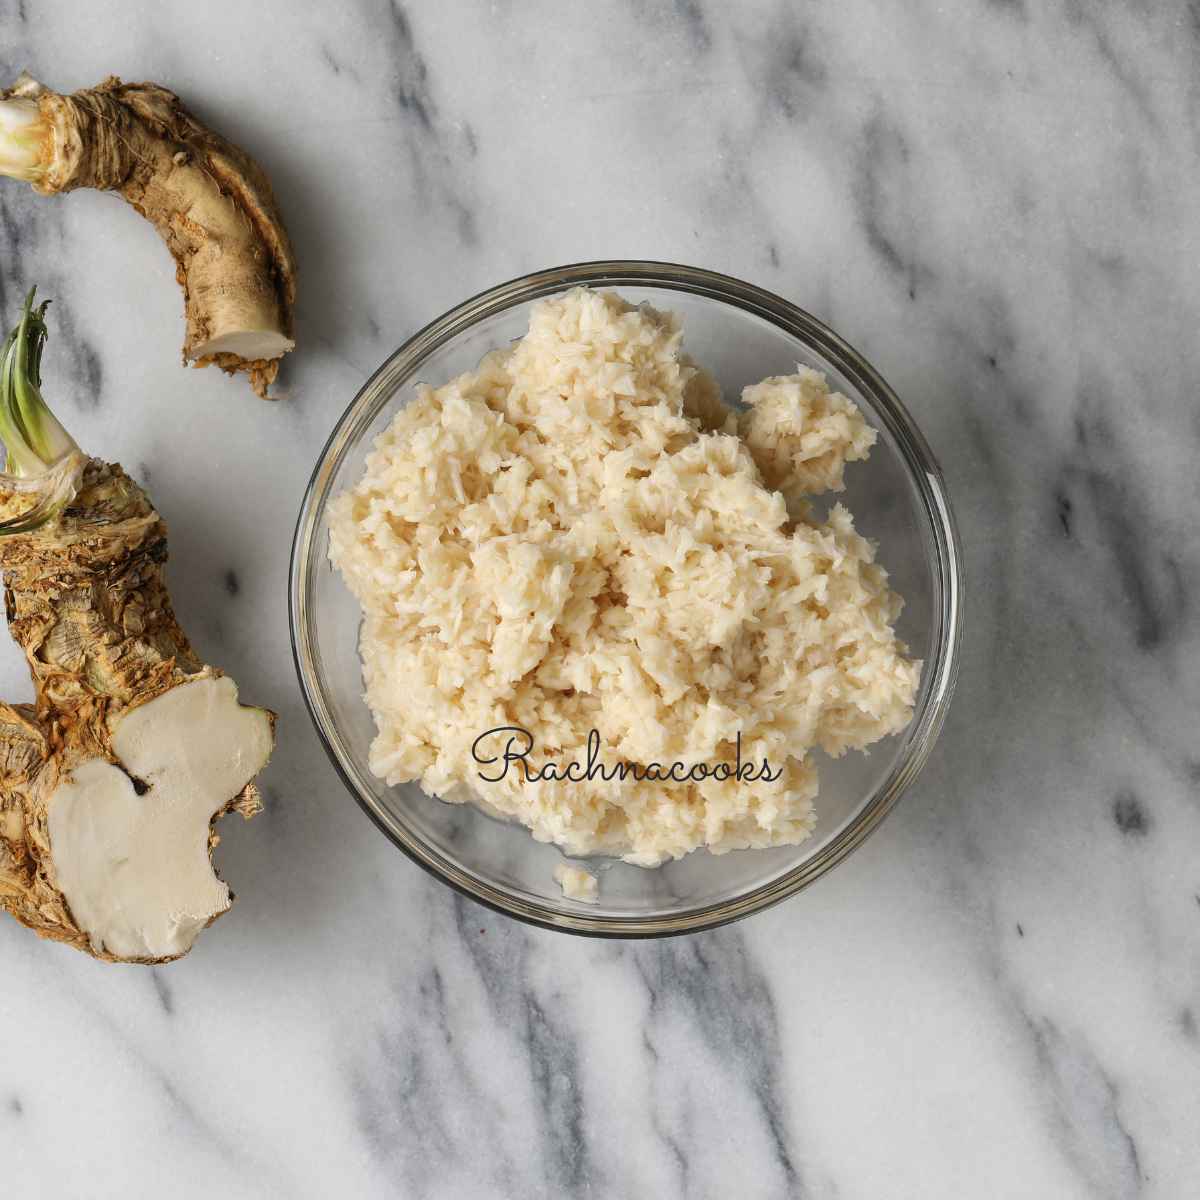 Grated horseradish in a bowl